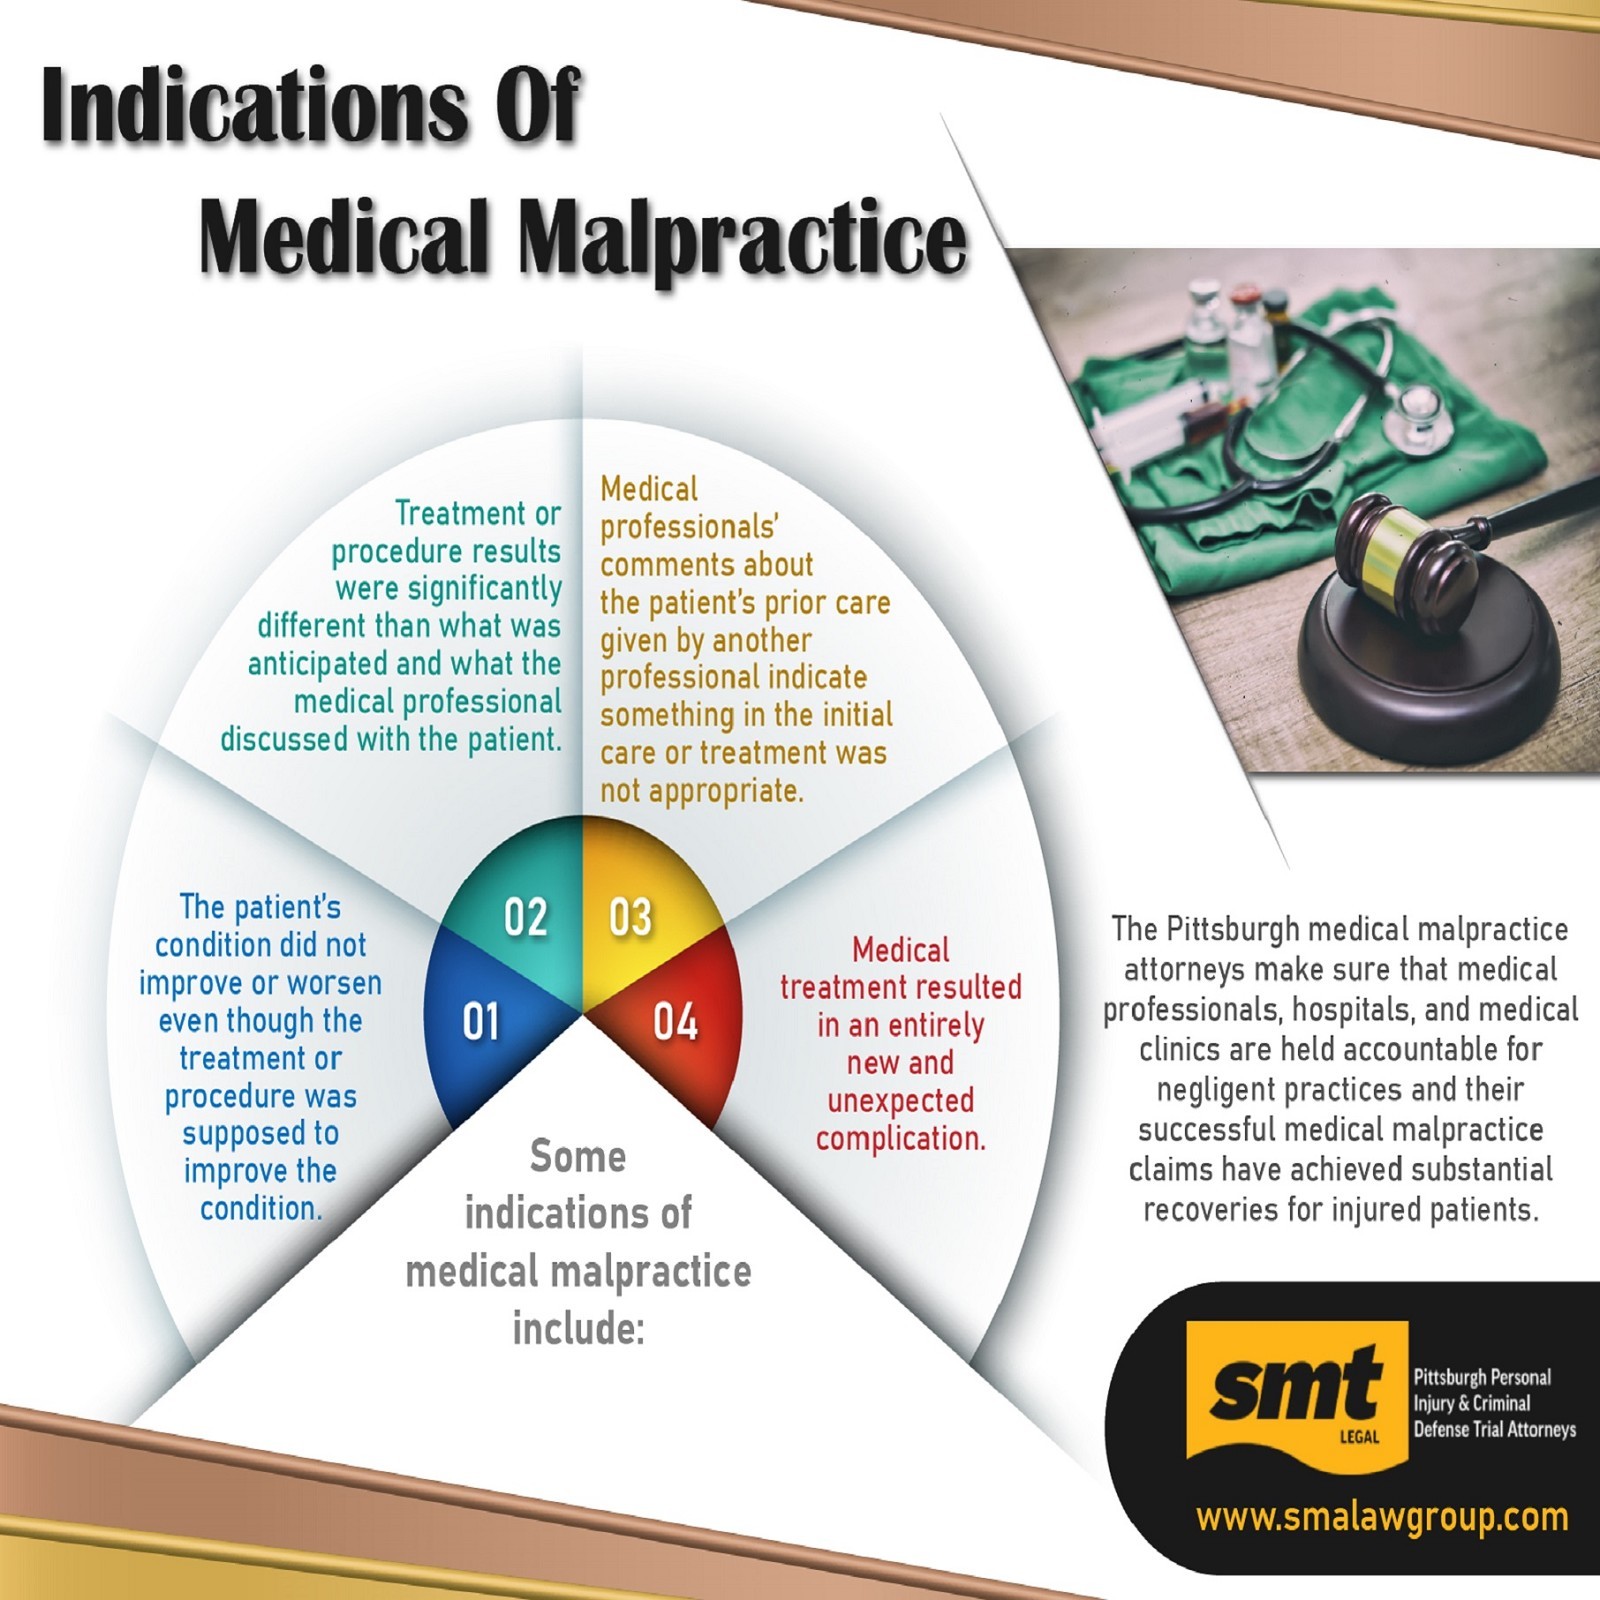 Indications Of Medical Malpractice